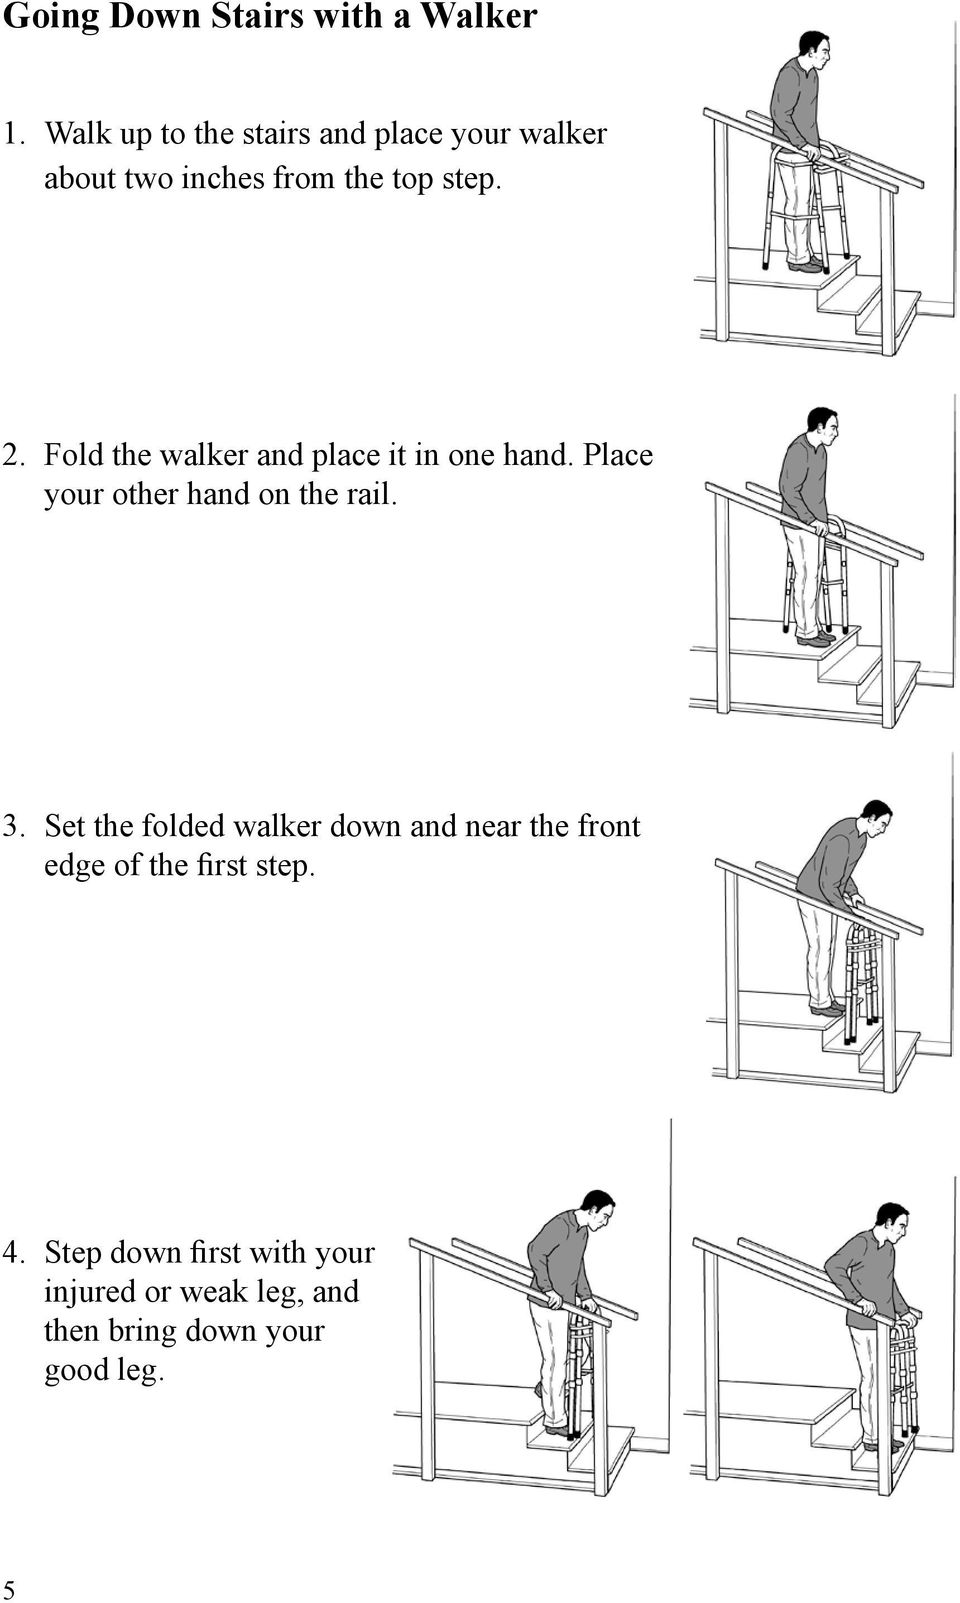 Fold the walker and place it in one hand. Place your other hand on the rail. 3.